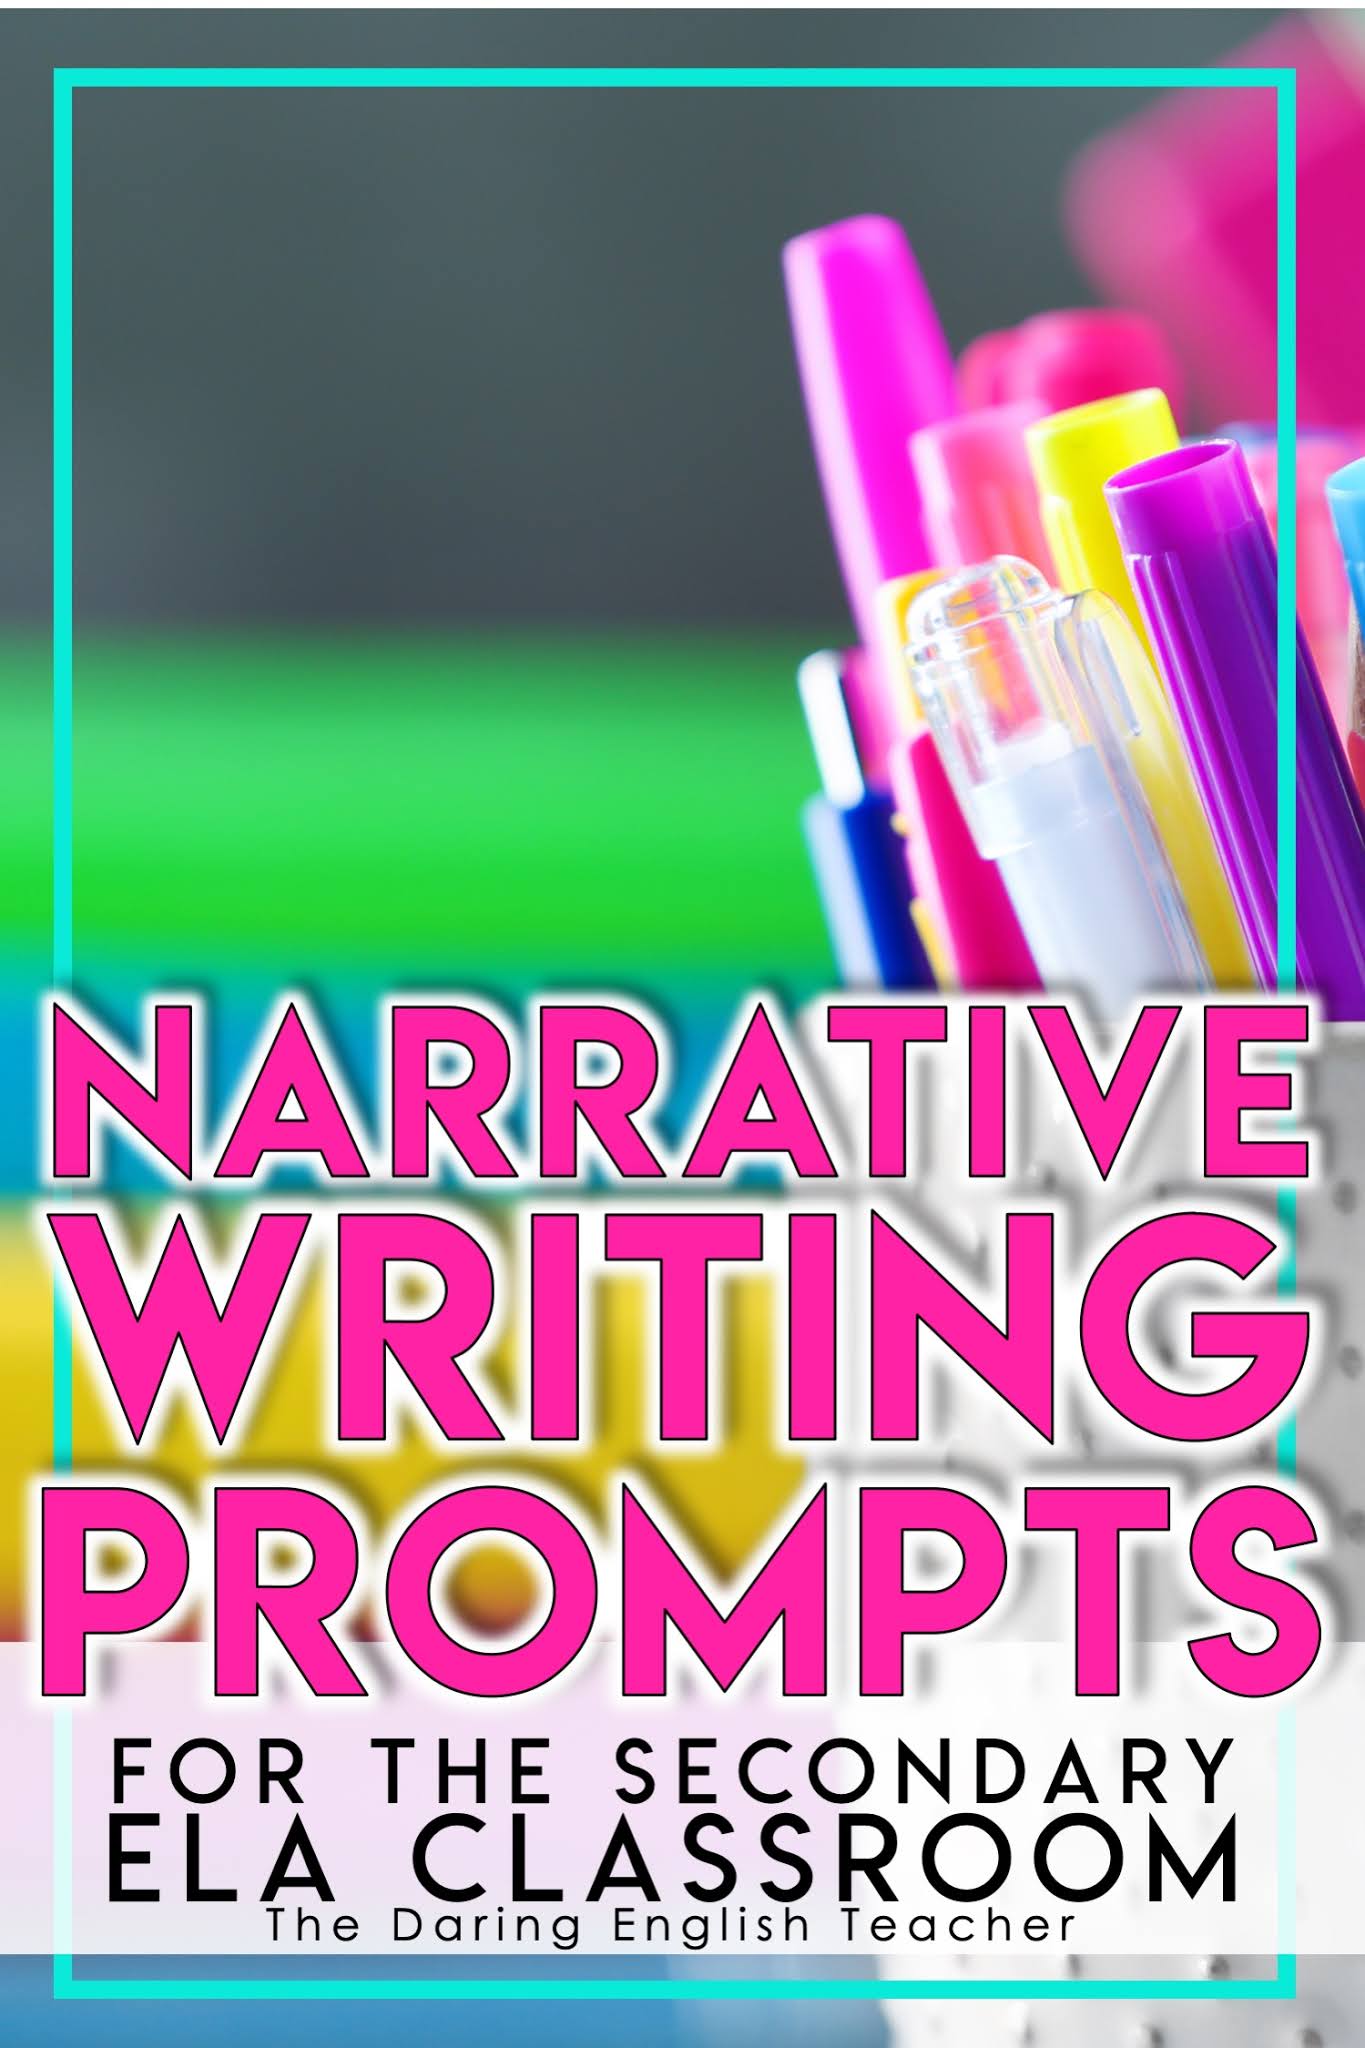 Narrative Writing Prompts for the Secondary ELA Classroom